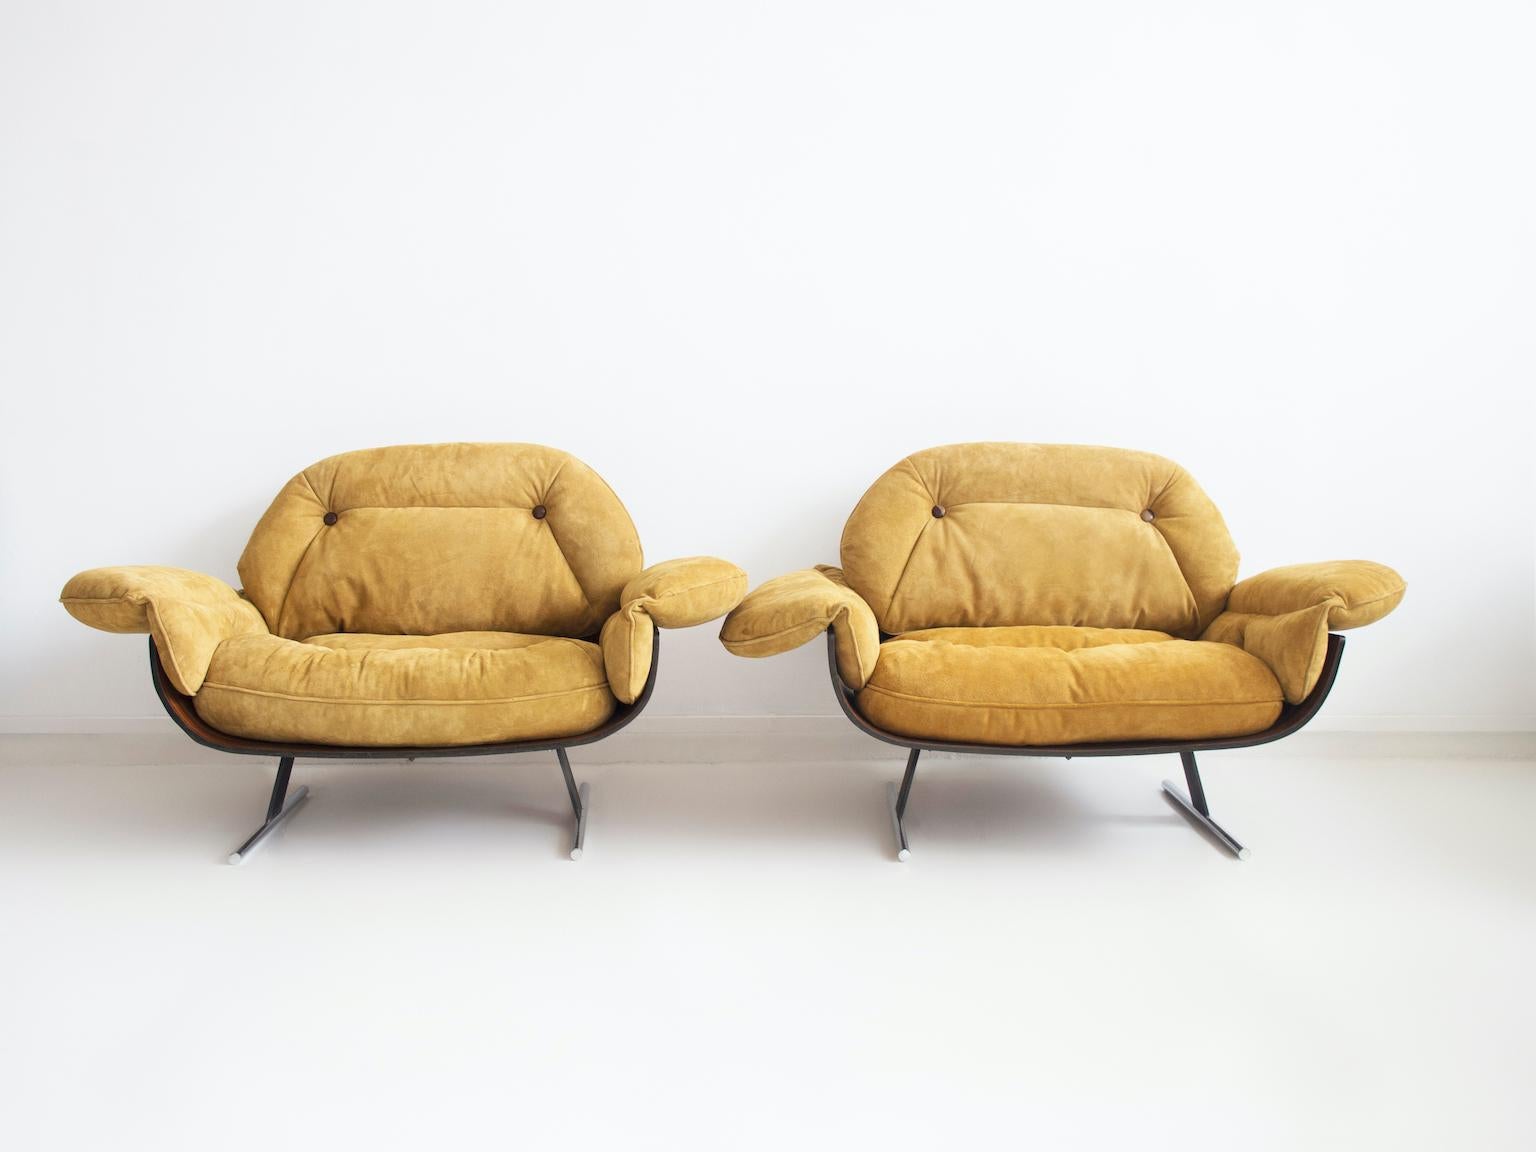 Pair of 'Presidencial' lounge armchairs, circa 1959-1965, by Polish-Brazilian architect and designer Jorge Zalszupin (1922-2020). These lounge chairs can be displayed with or without their original mustard colored nubuck leather cushions. Base